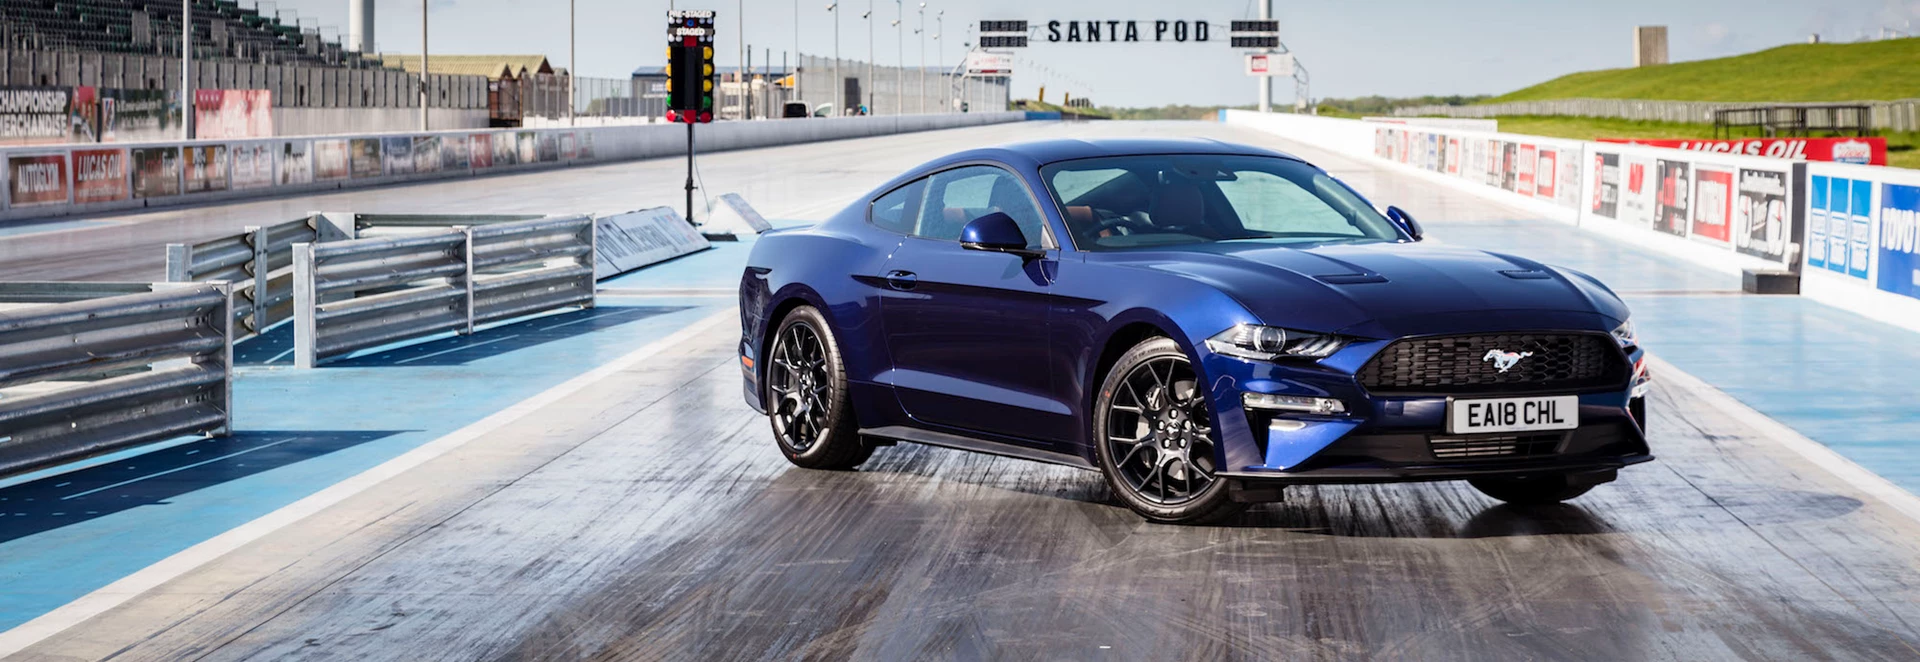 New upgrades introduced to 2018 Ford Mustang